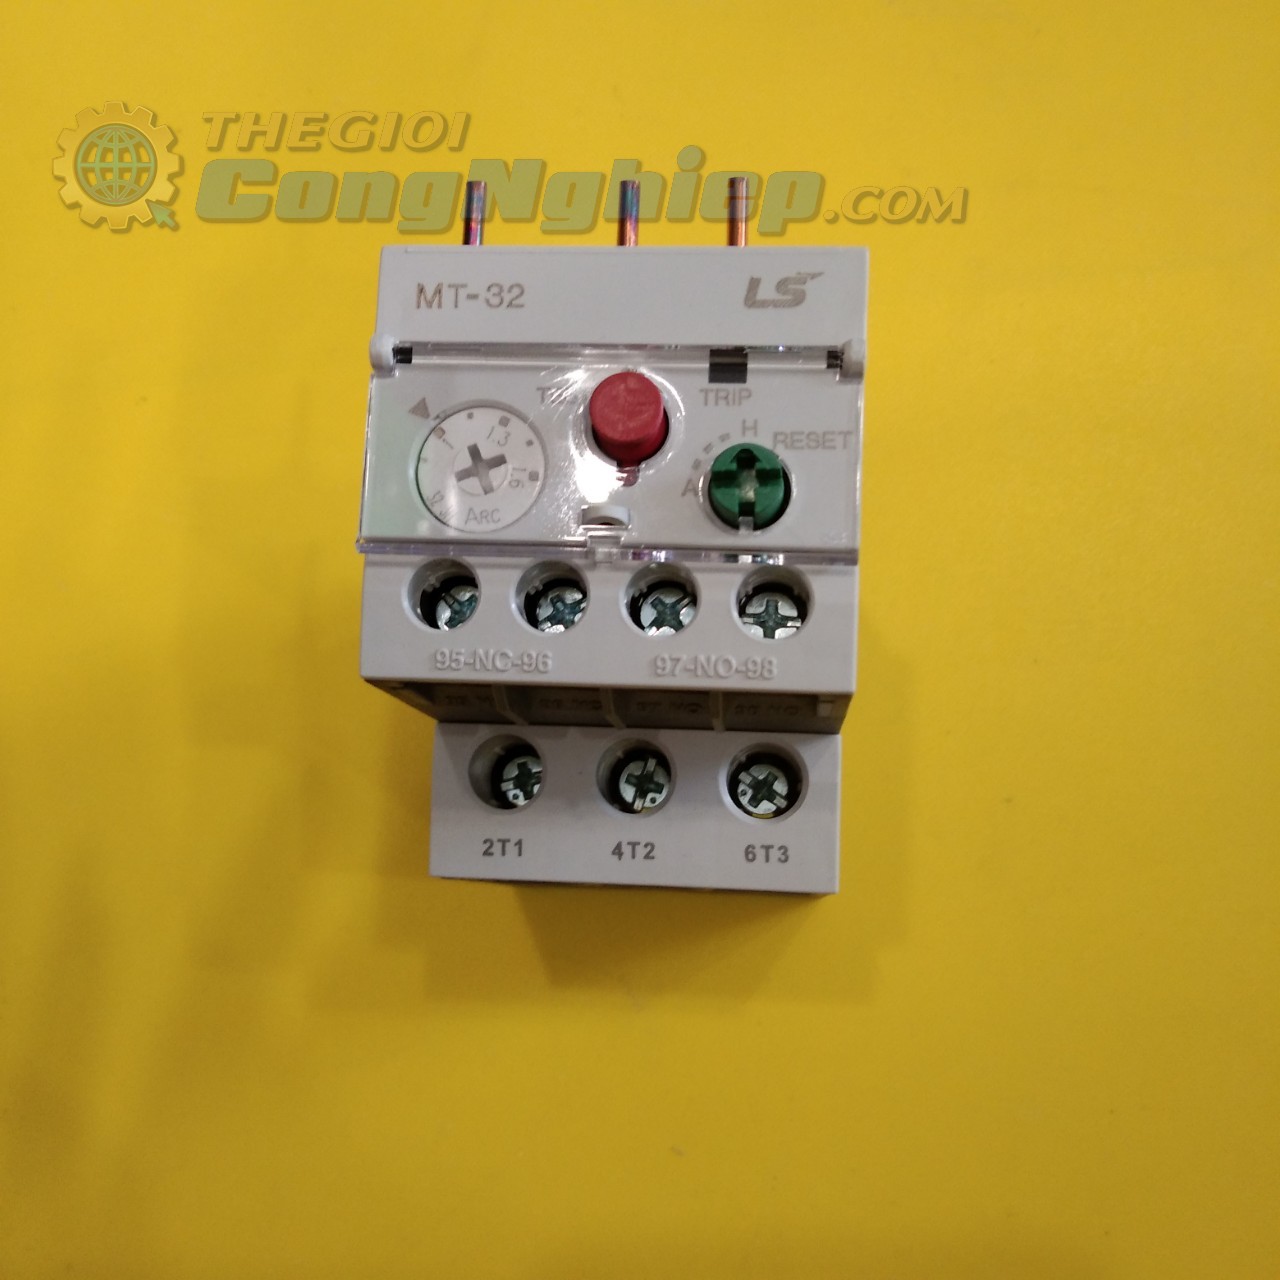  Relay nhiệt 3P LS MT-32 (1-1.6A)